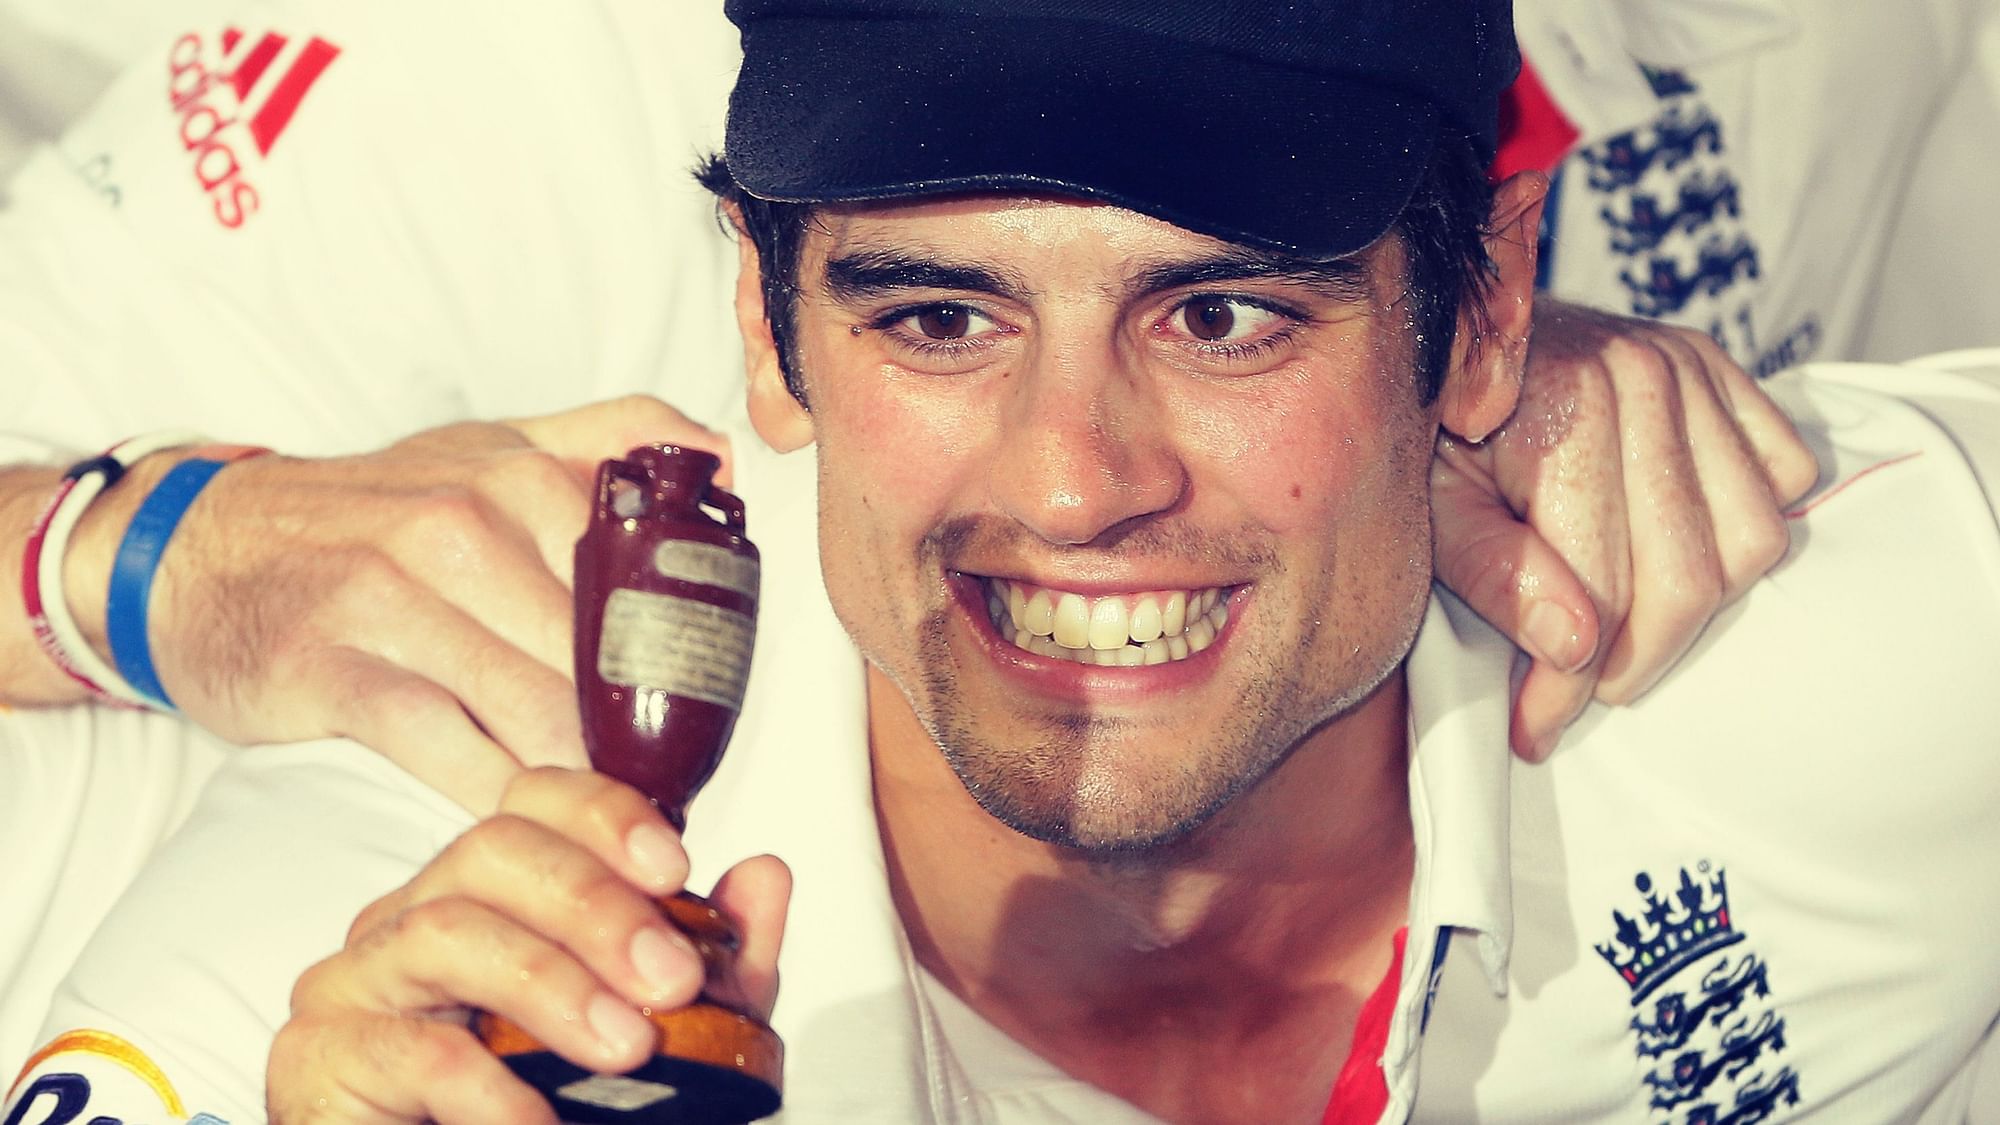 File photo England’s captain Alastair Cook as he holds up the Ashes Urn after the 2013 Ashes.